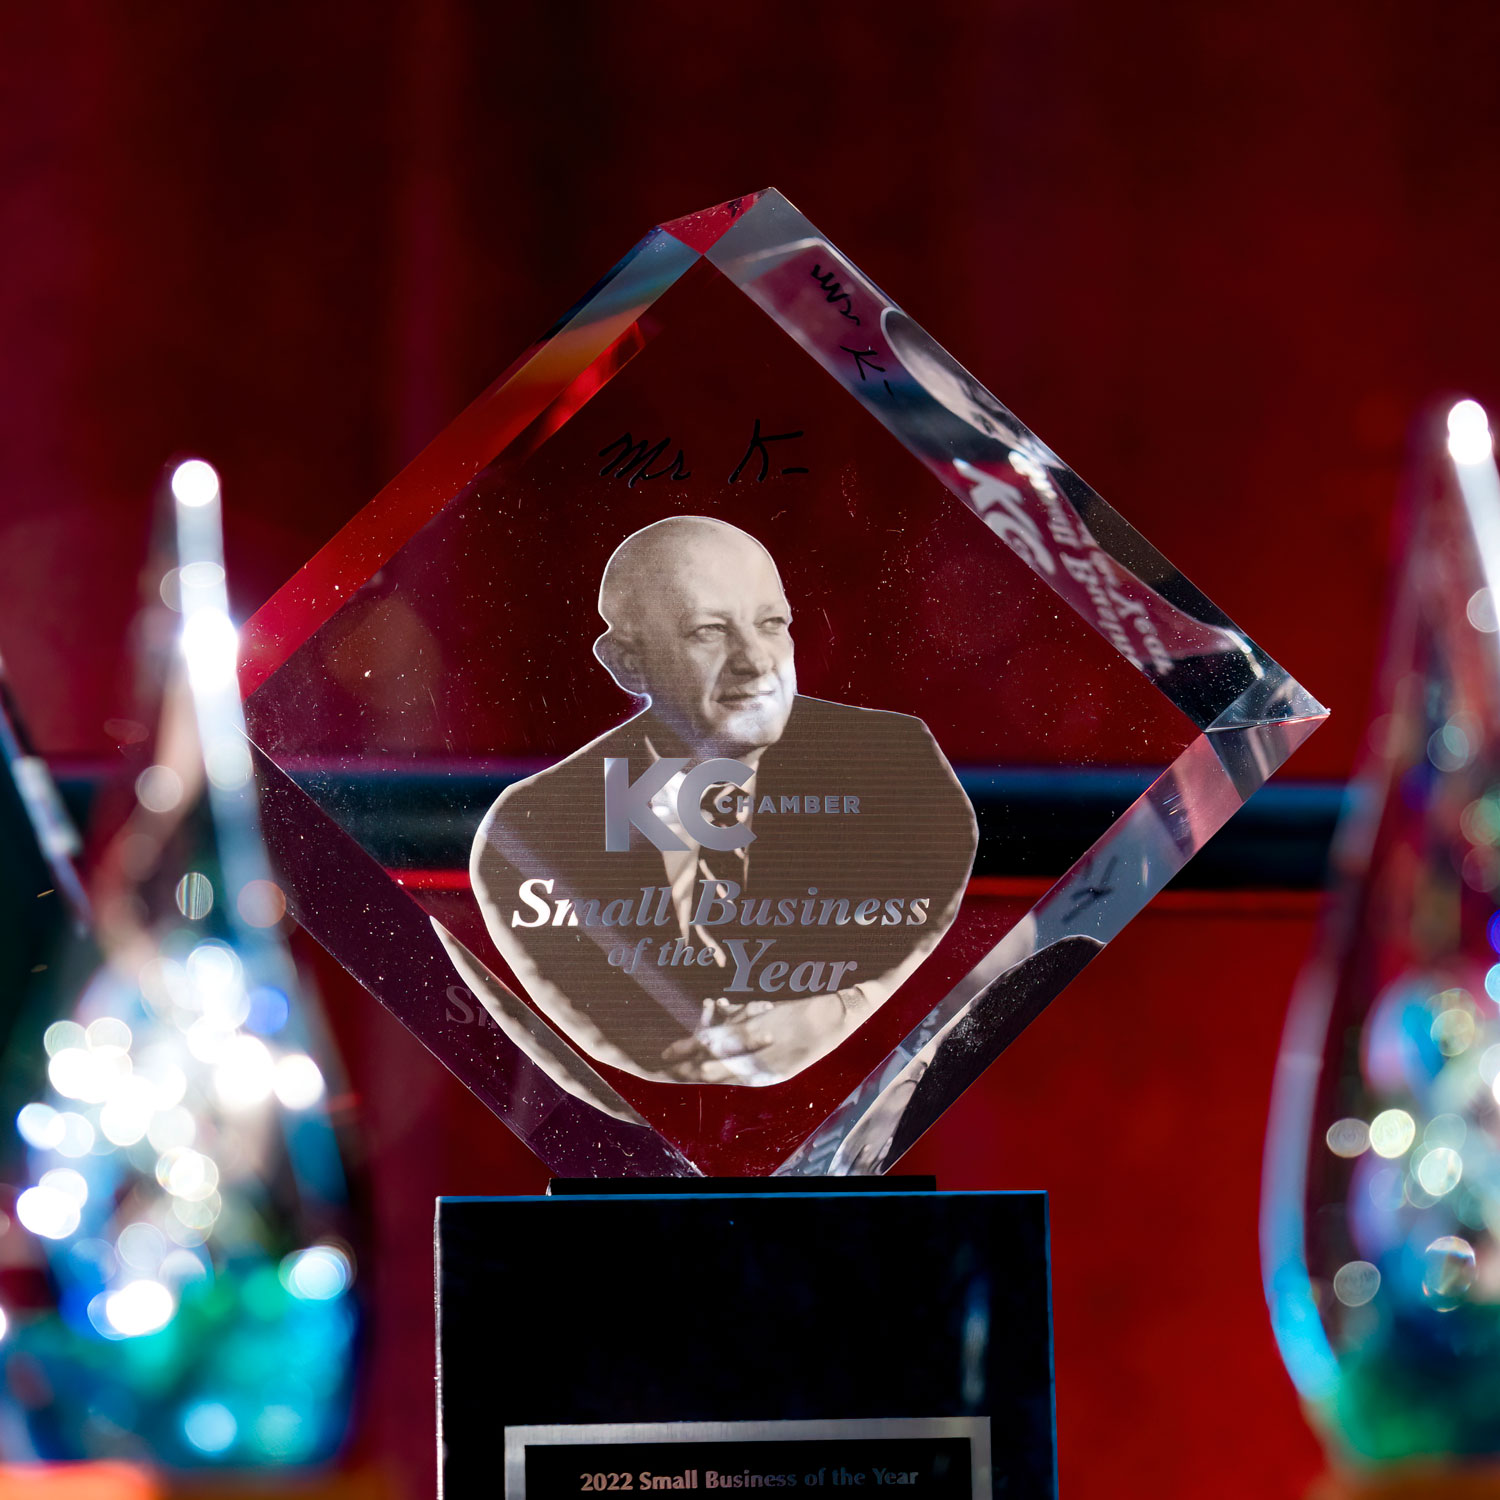 Photo of Small Business Celebration awards, featuring the Mr. K award in the center